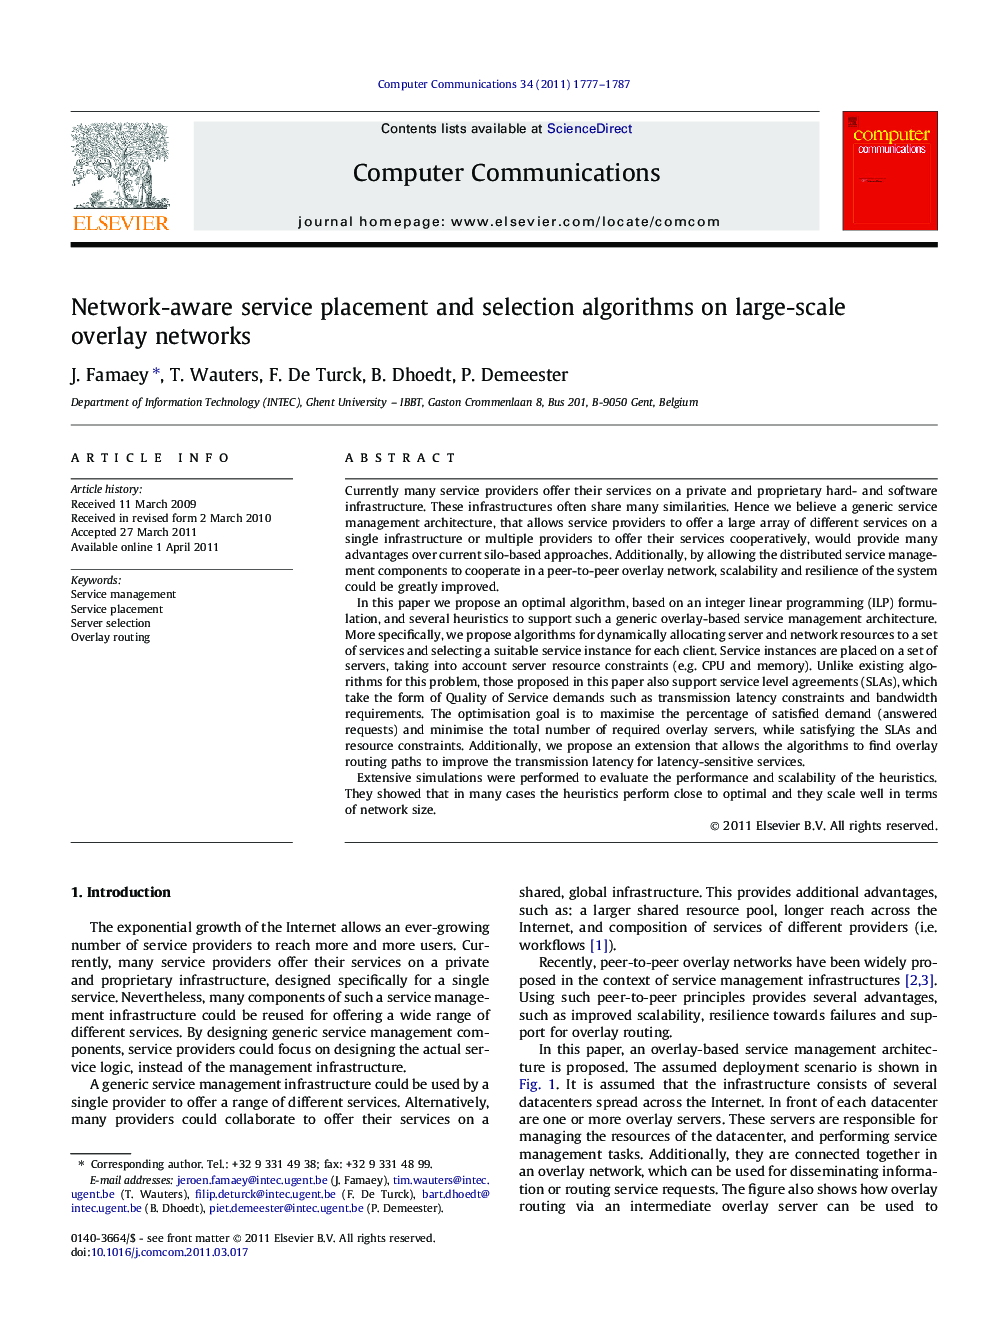 Network-aware service placement and selection algorithms on large-scale overlay networks